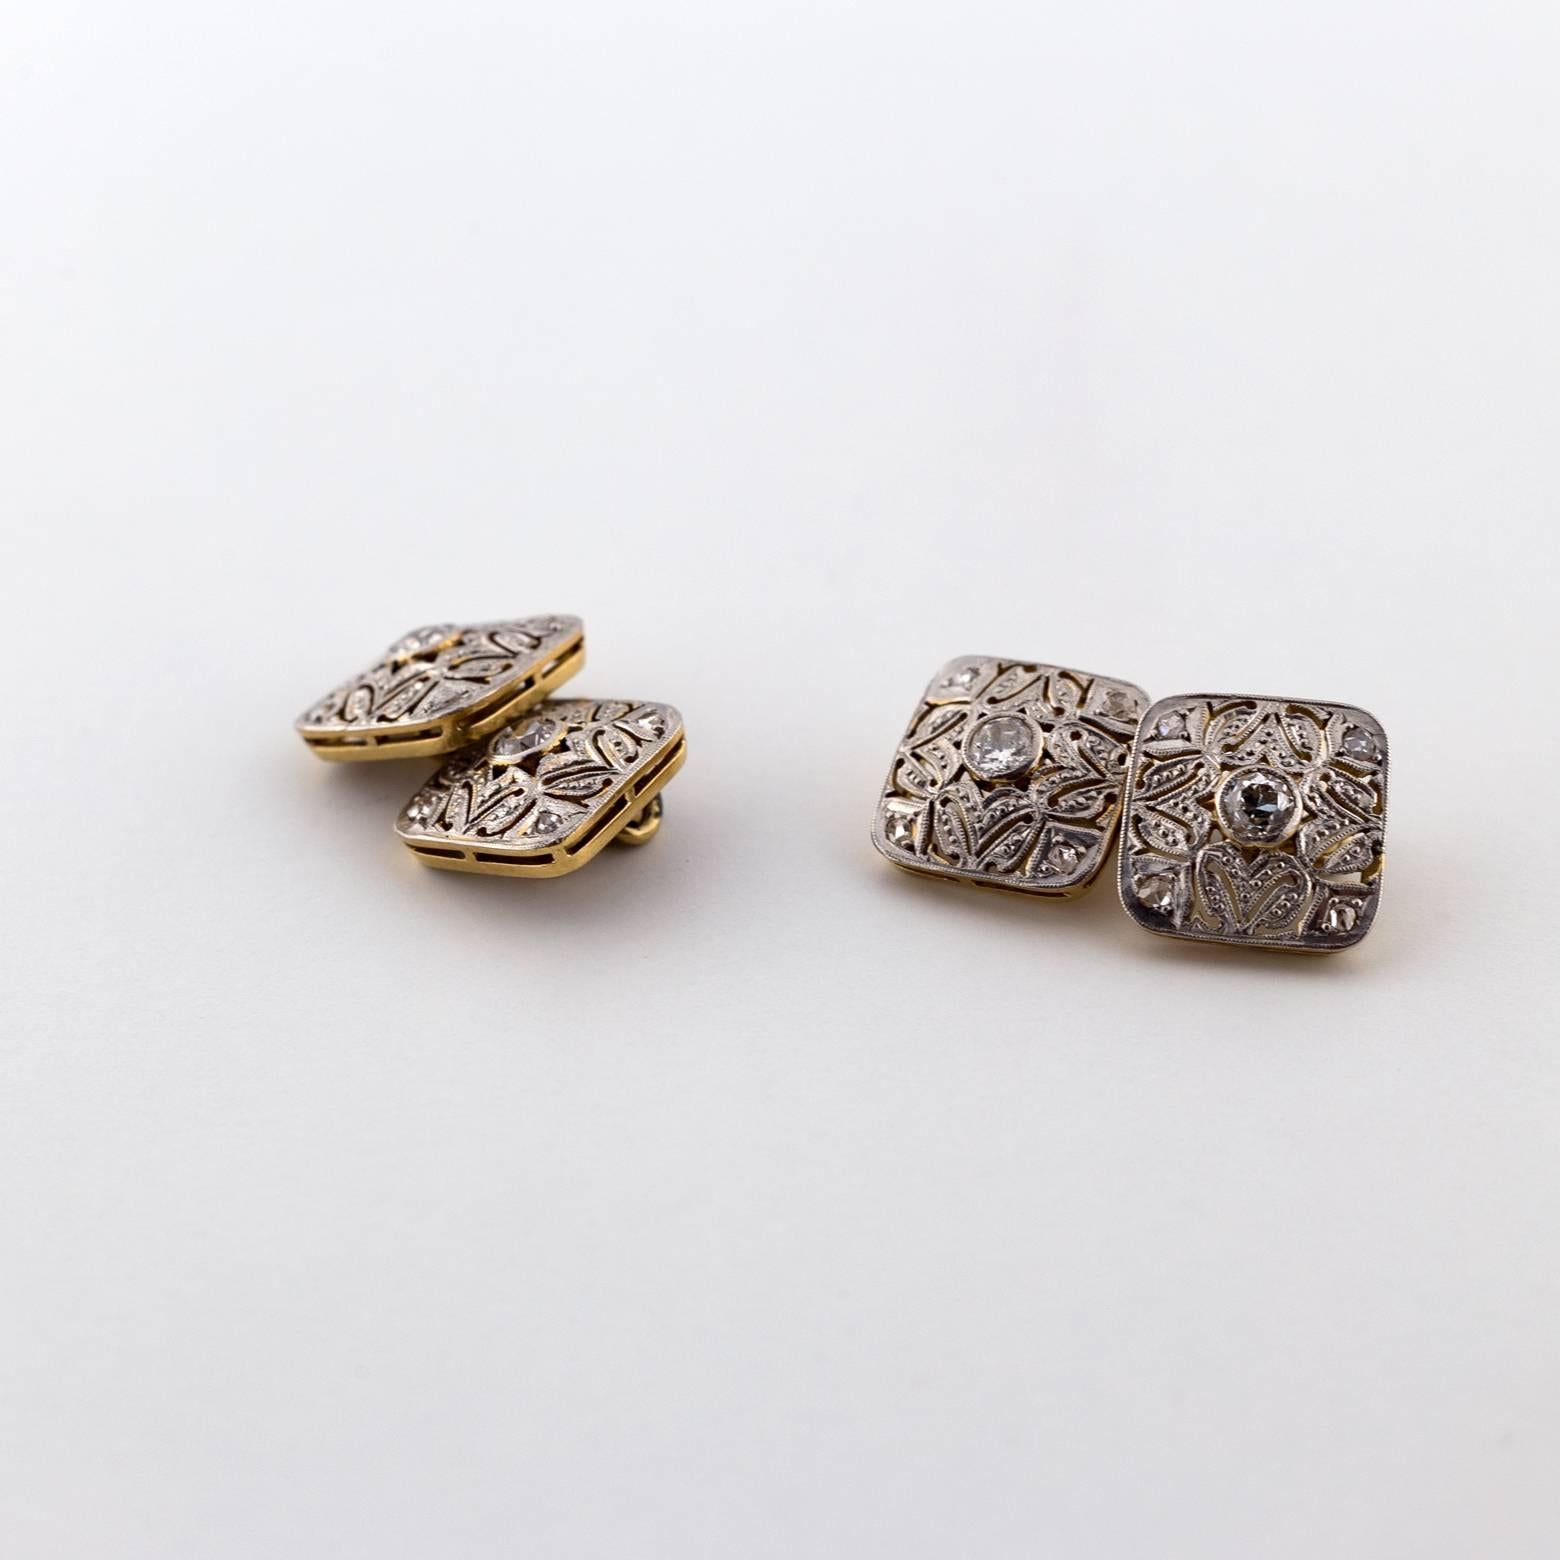 Stunning and vintage white and yellow gold cuff-links 0.65 total weight of diamonds with the center stones as old mine cuts and the four accent diamonds on each cuff are rose-cuts. 20 diamonds total!